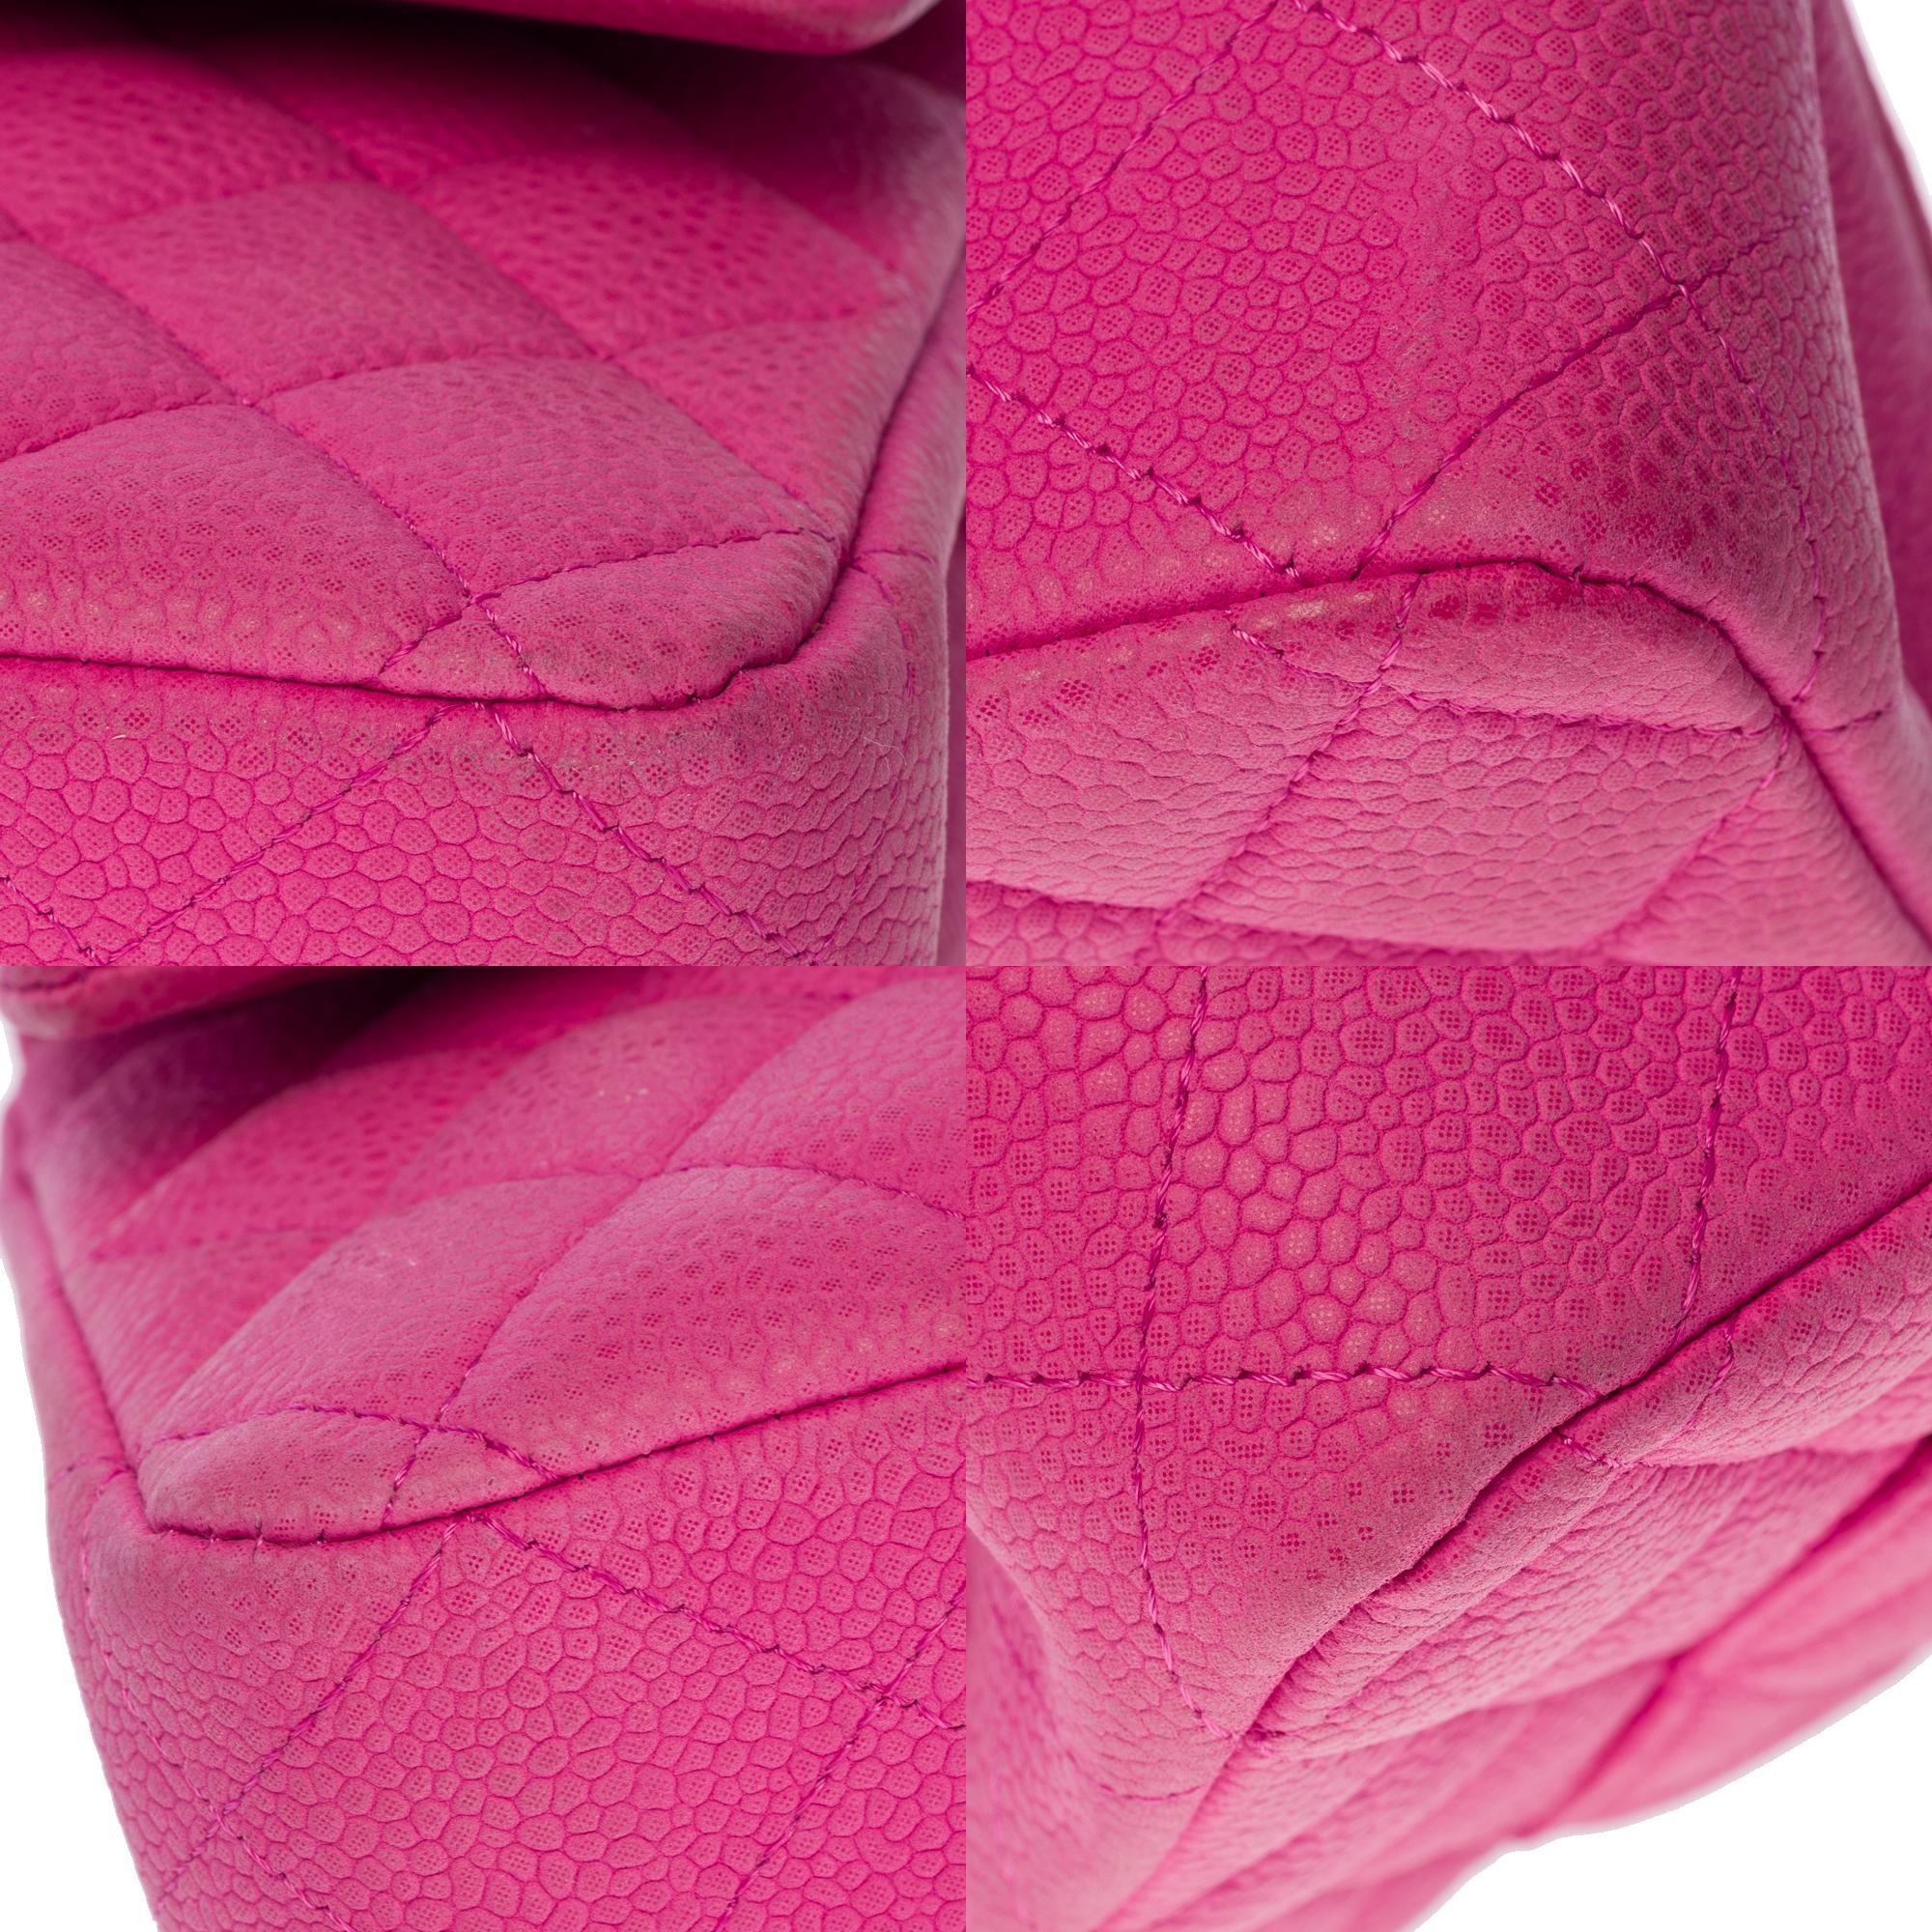 Chanel Timeless double flap shoulder bag in Pink caviar quilted leather, SHW For Sale 6